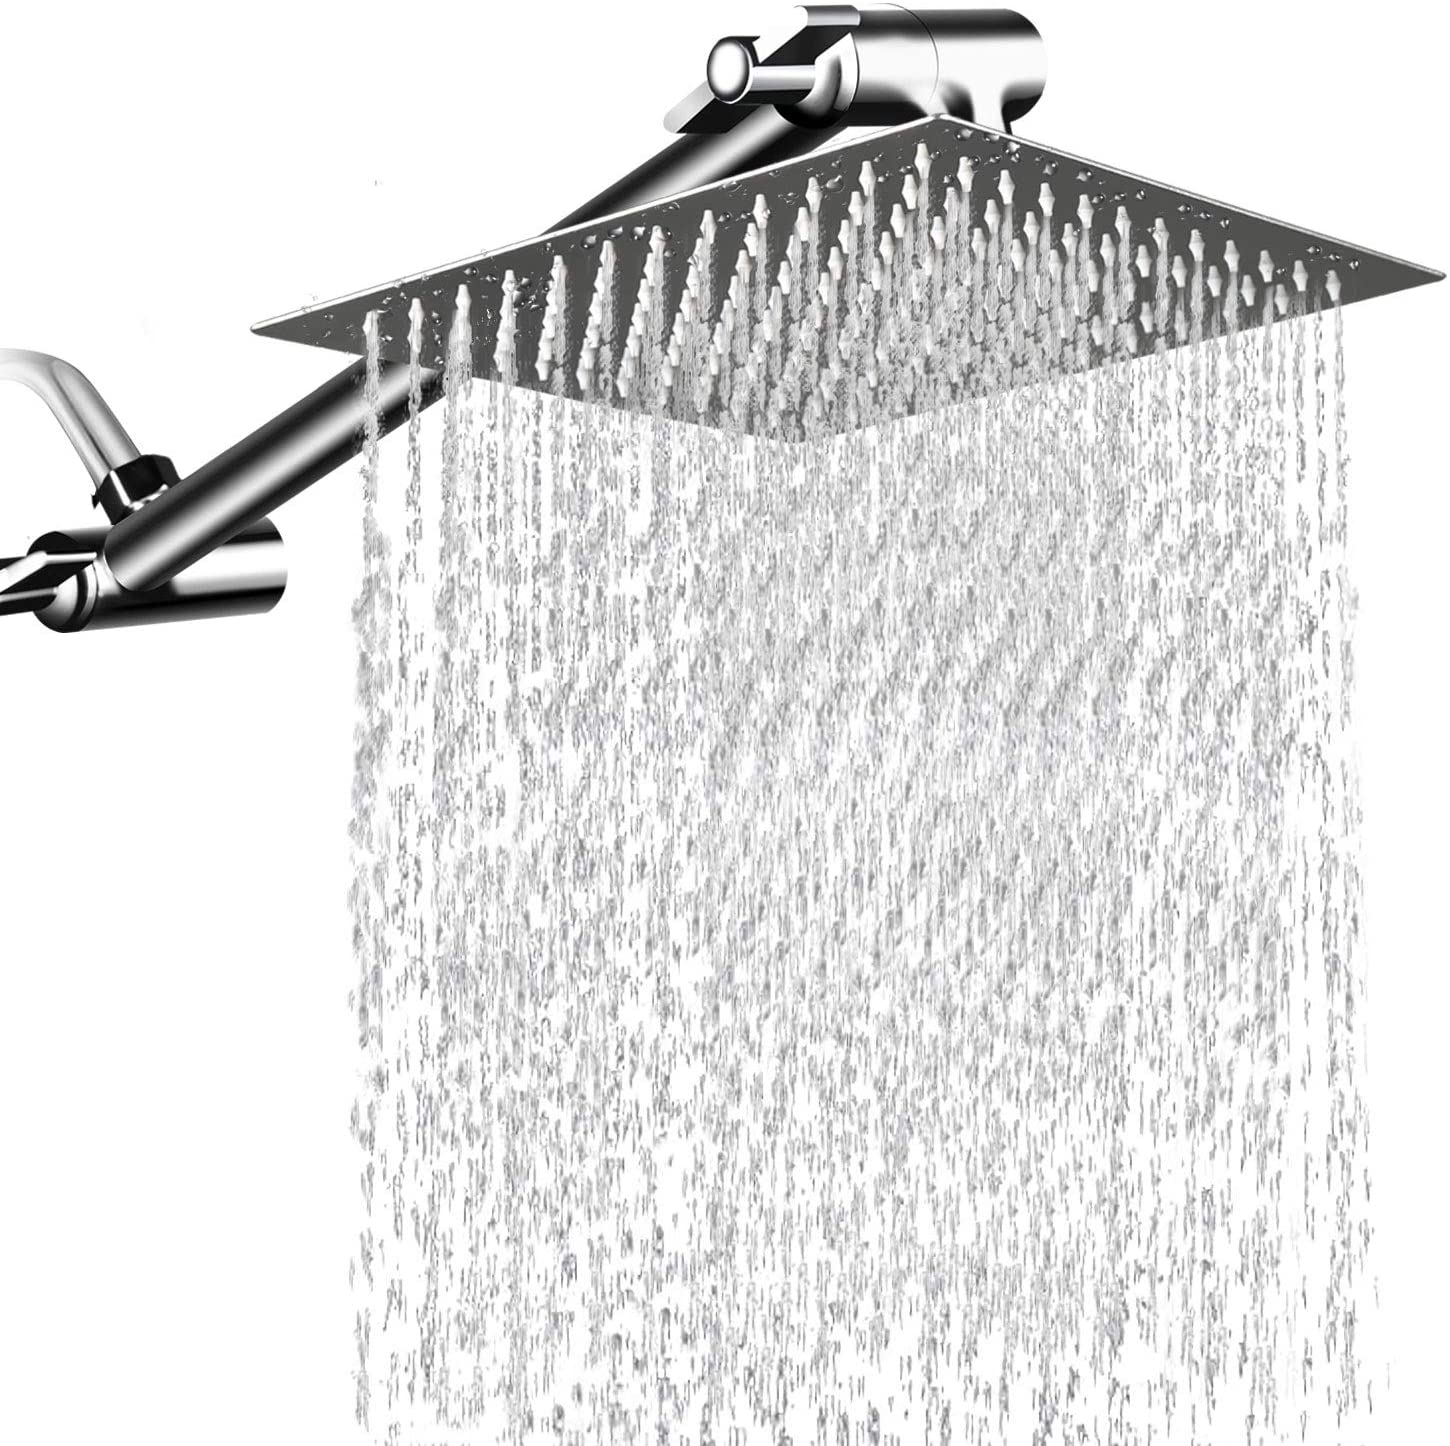 Review of MeSun 12 Inch High Pressure Showerhead with 11 Inch Arm